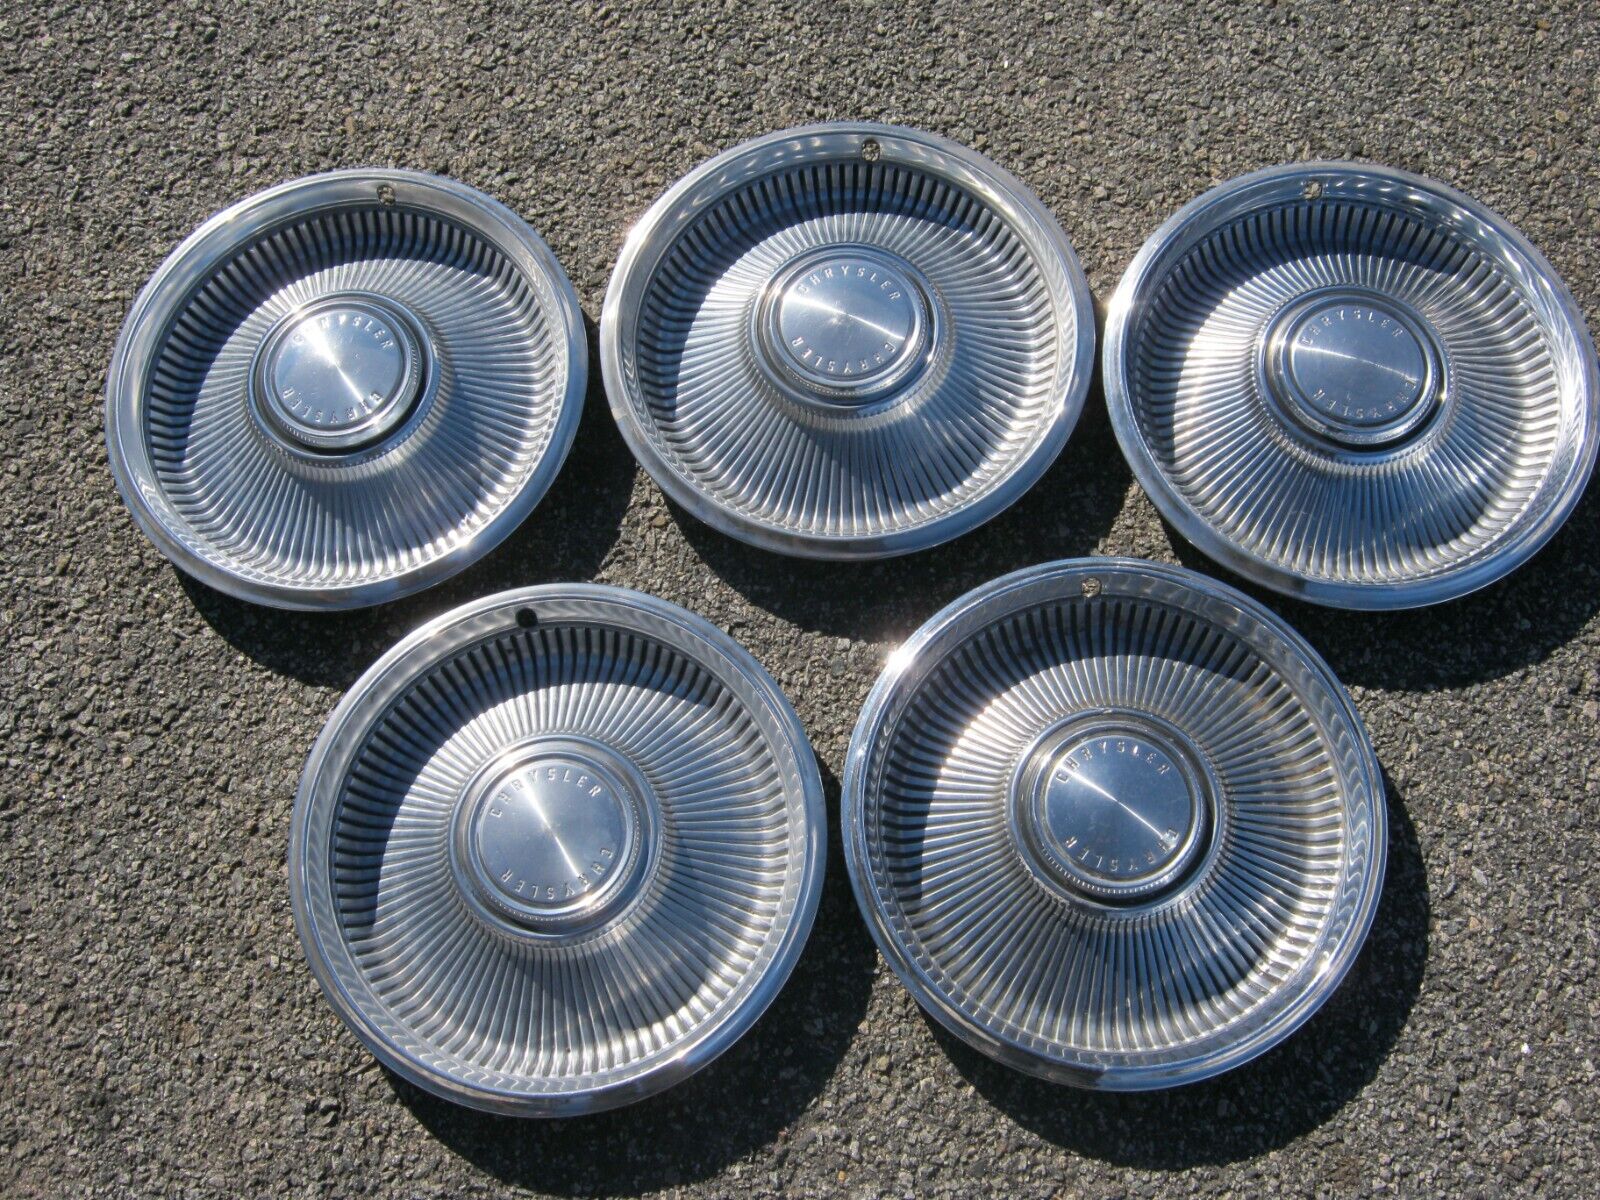 Lot of factory 1967 Chrysler New Yorker 14 inch hubcaps wheel covers